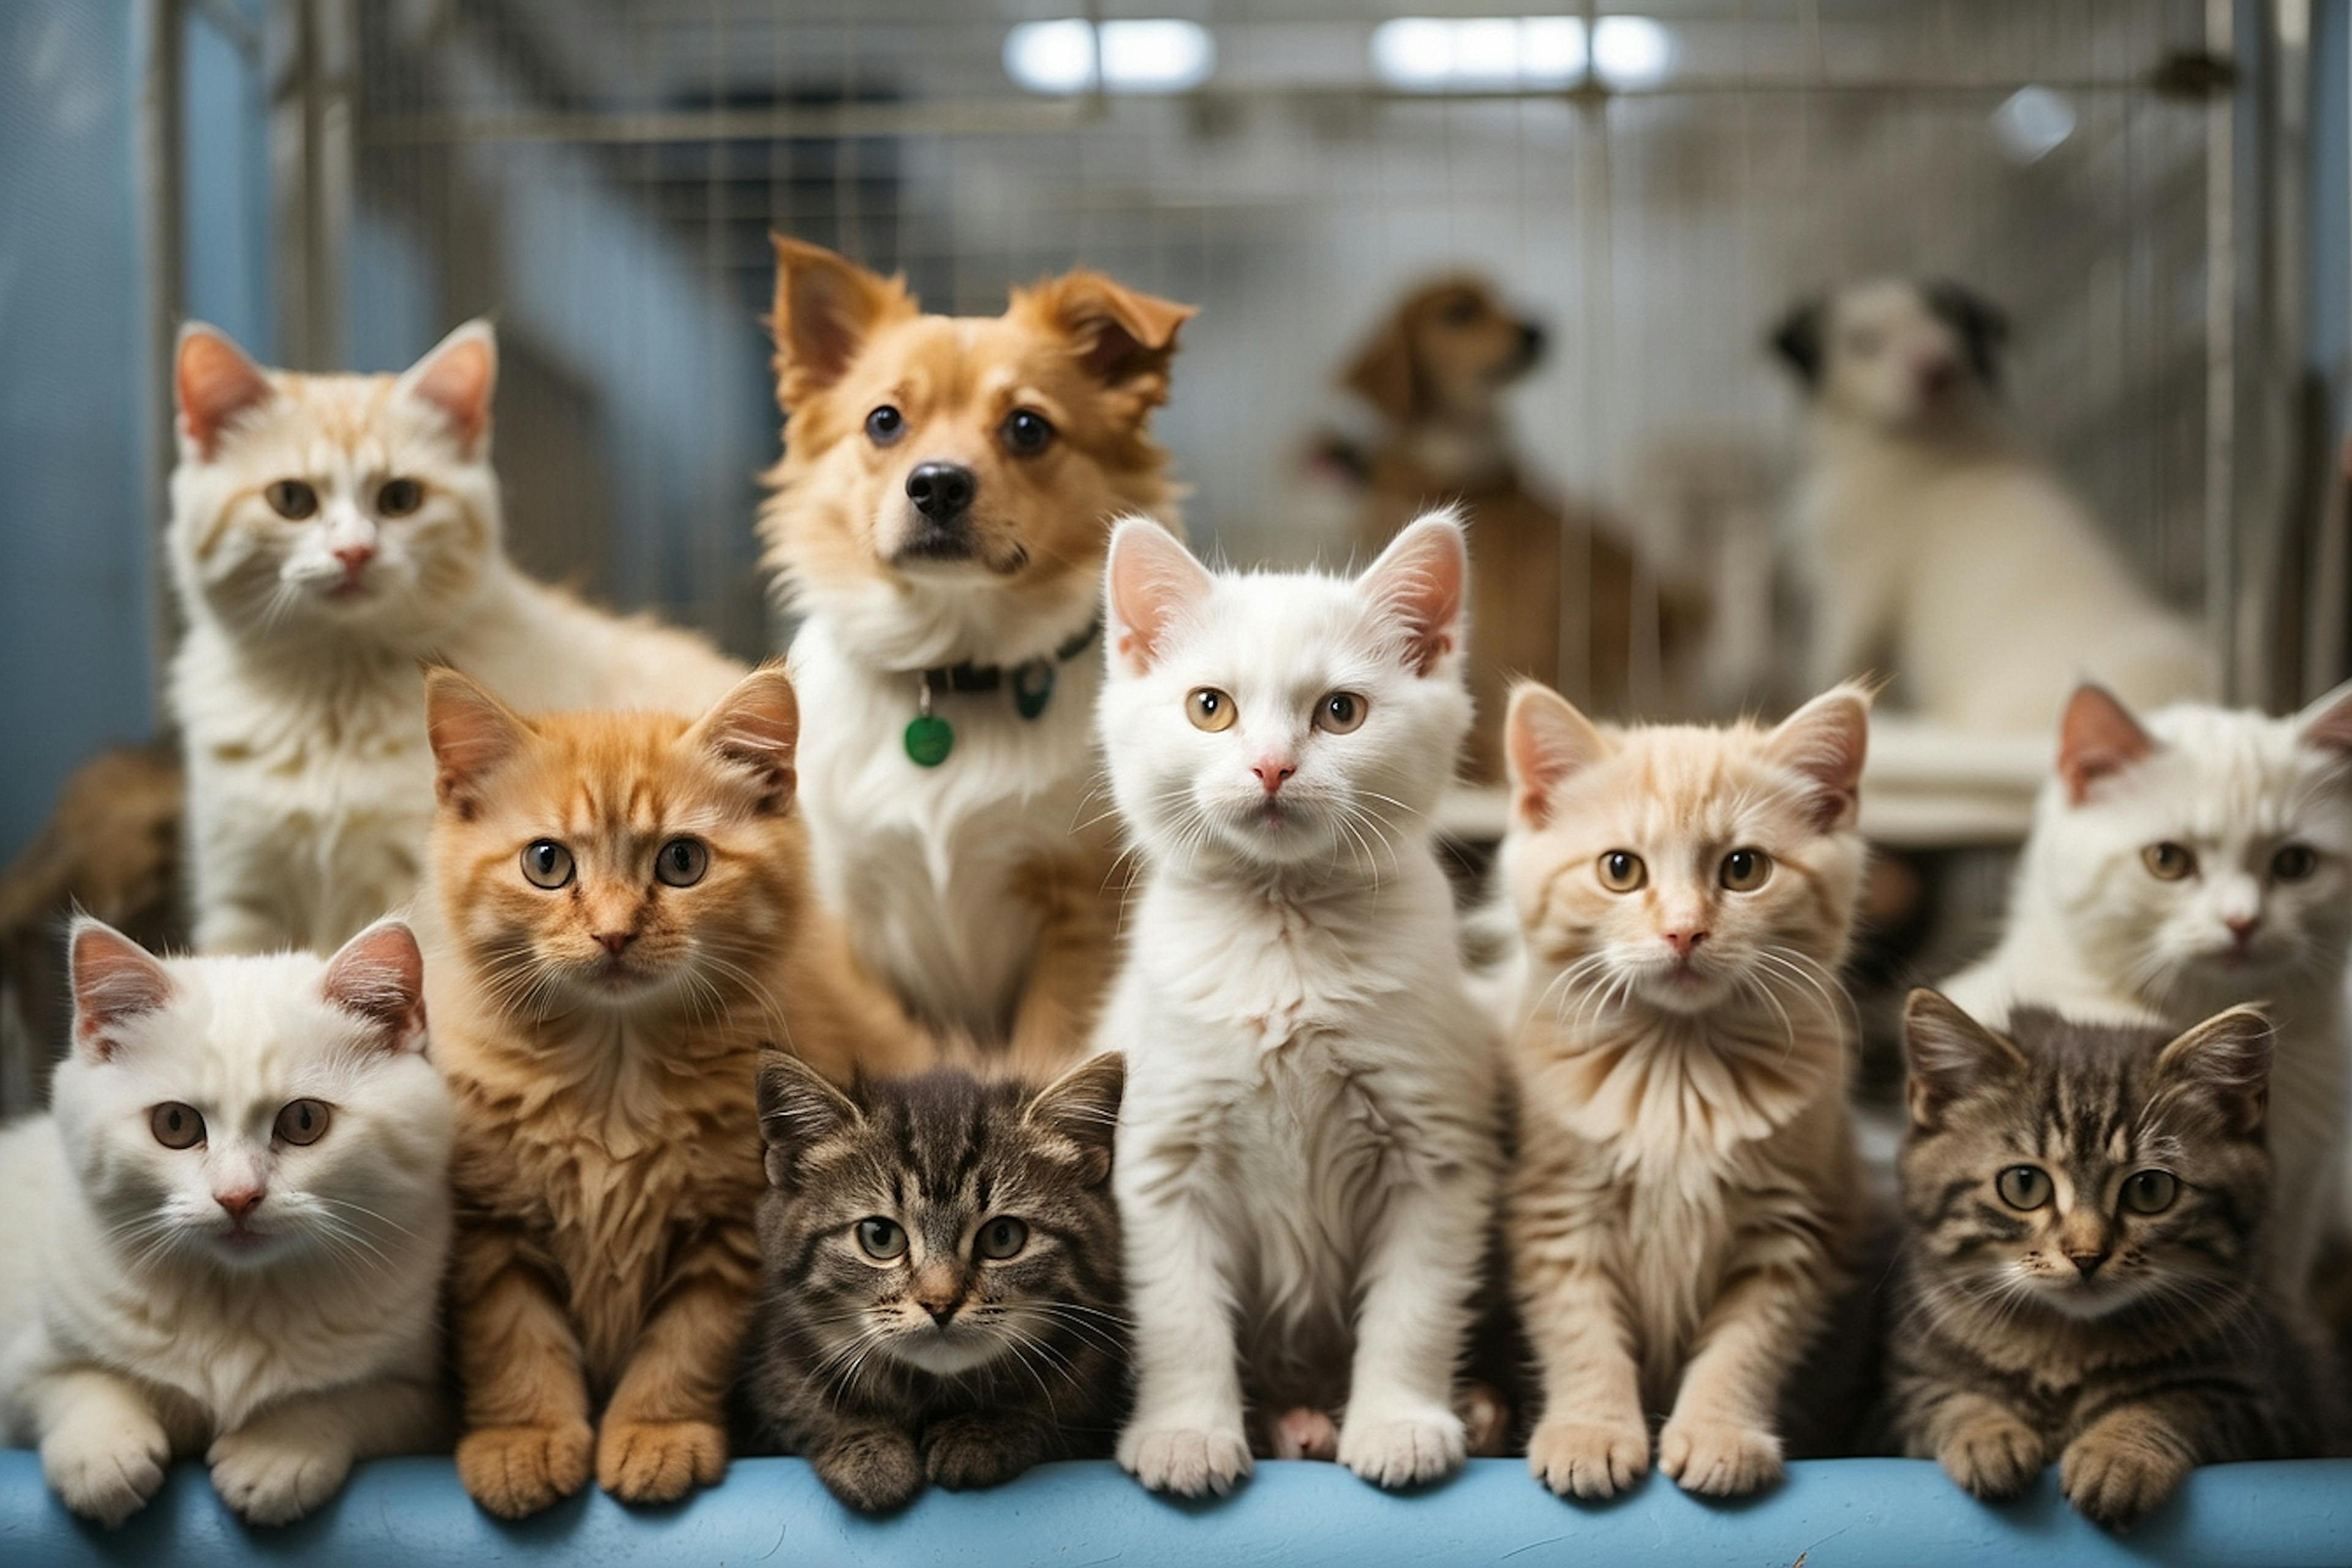 	Why do neural networks love cats? Because the internet is full of kitties!